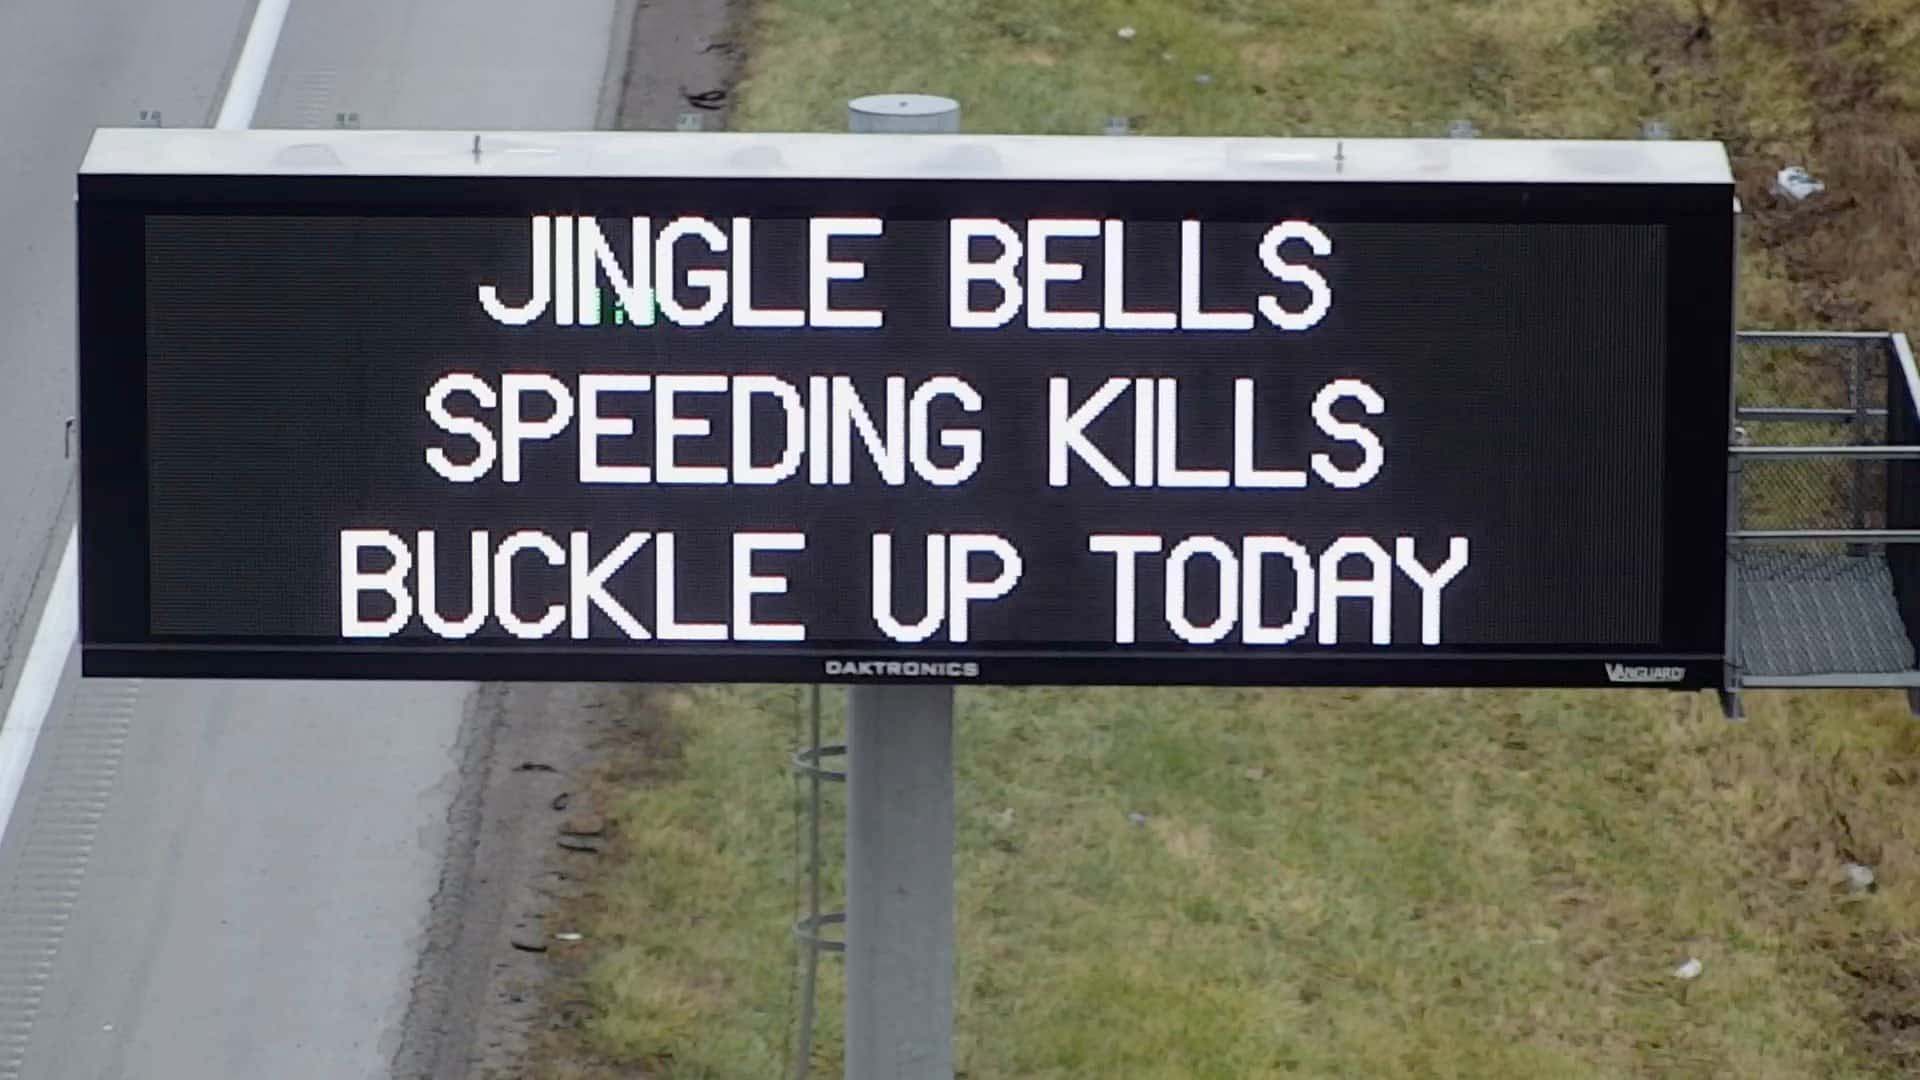 Feds Ban Silly Highway Signs - A Hilarious Sign Reminding Drivers That &Quot;Jingle Bells Speeding Kills - Buckle Up Today!